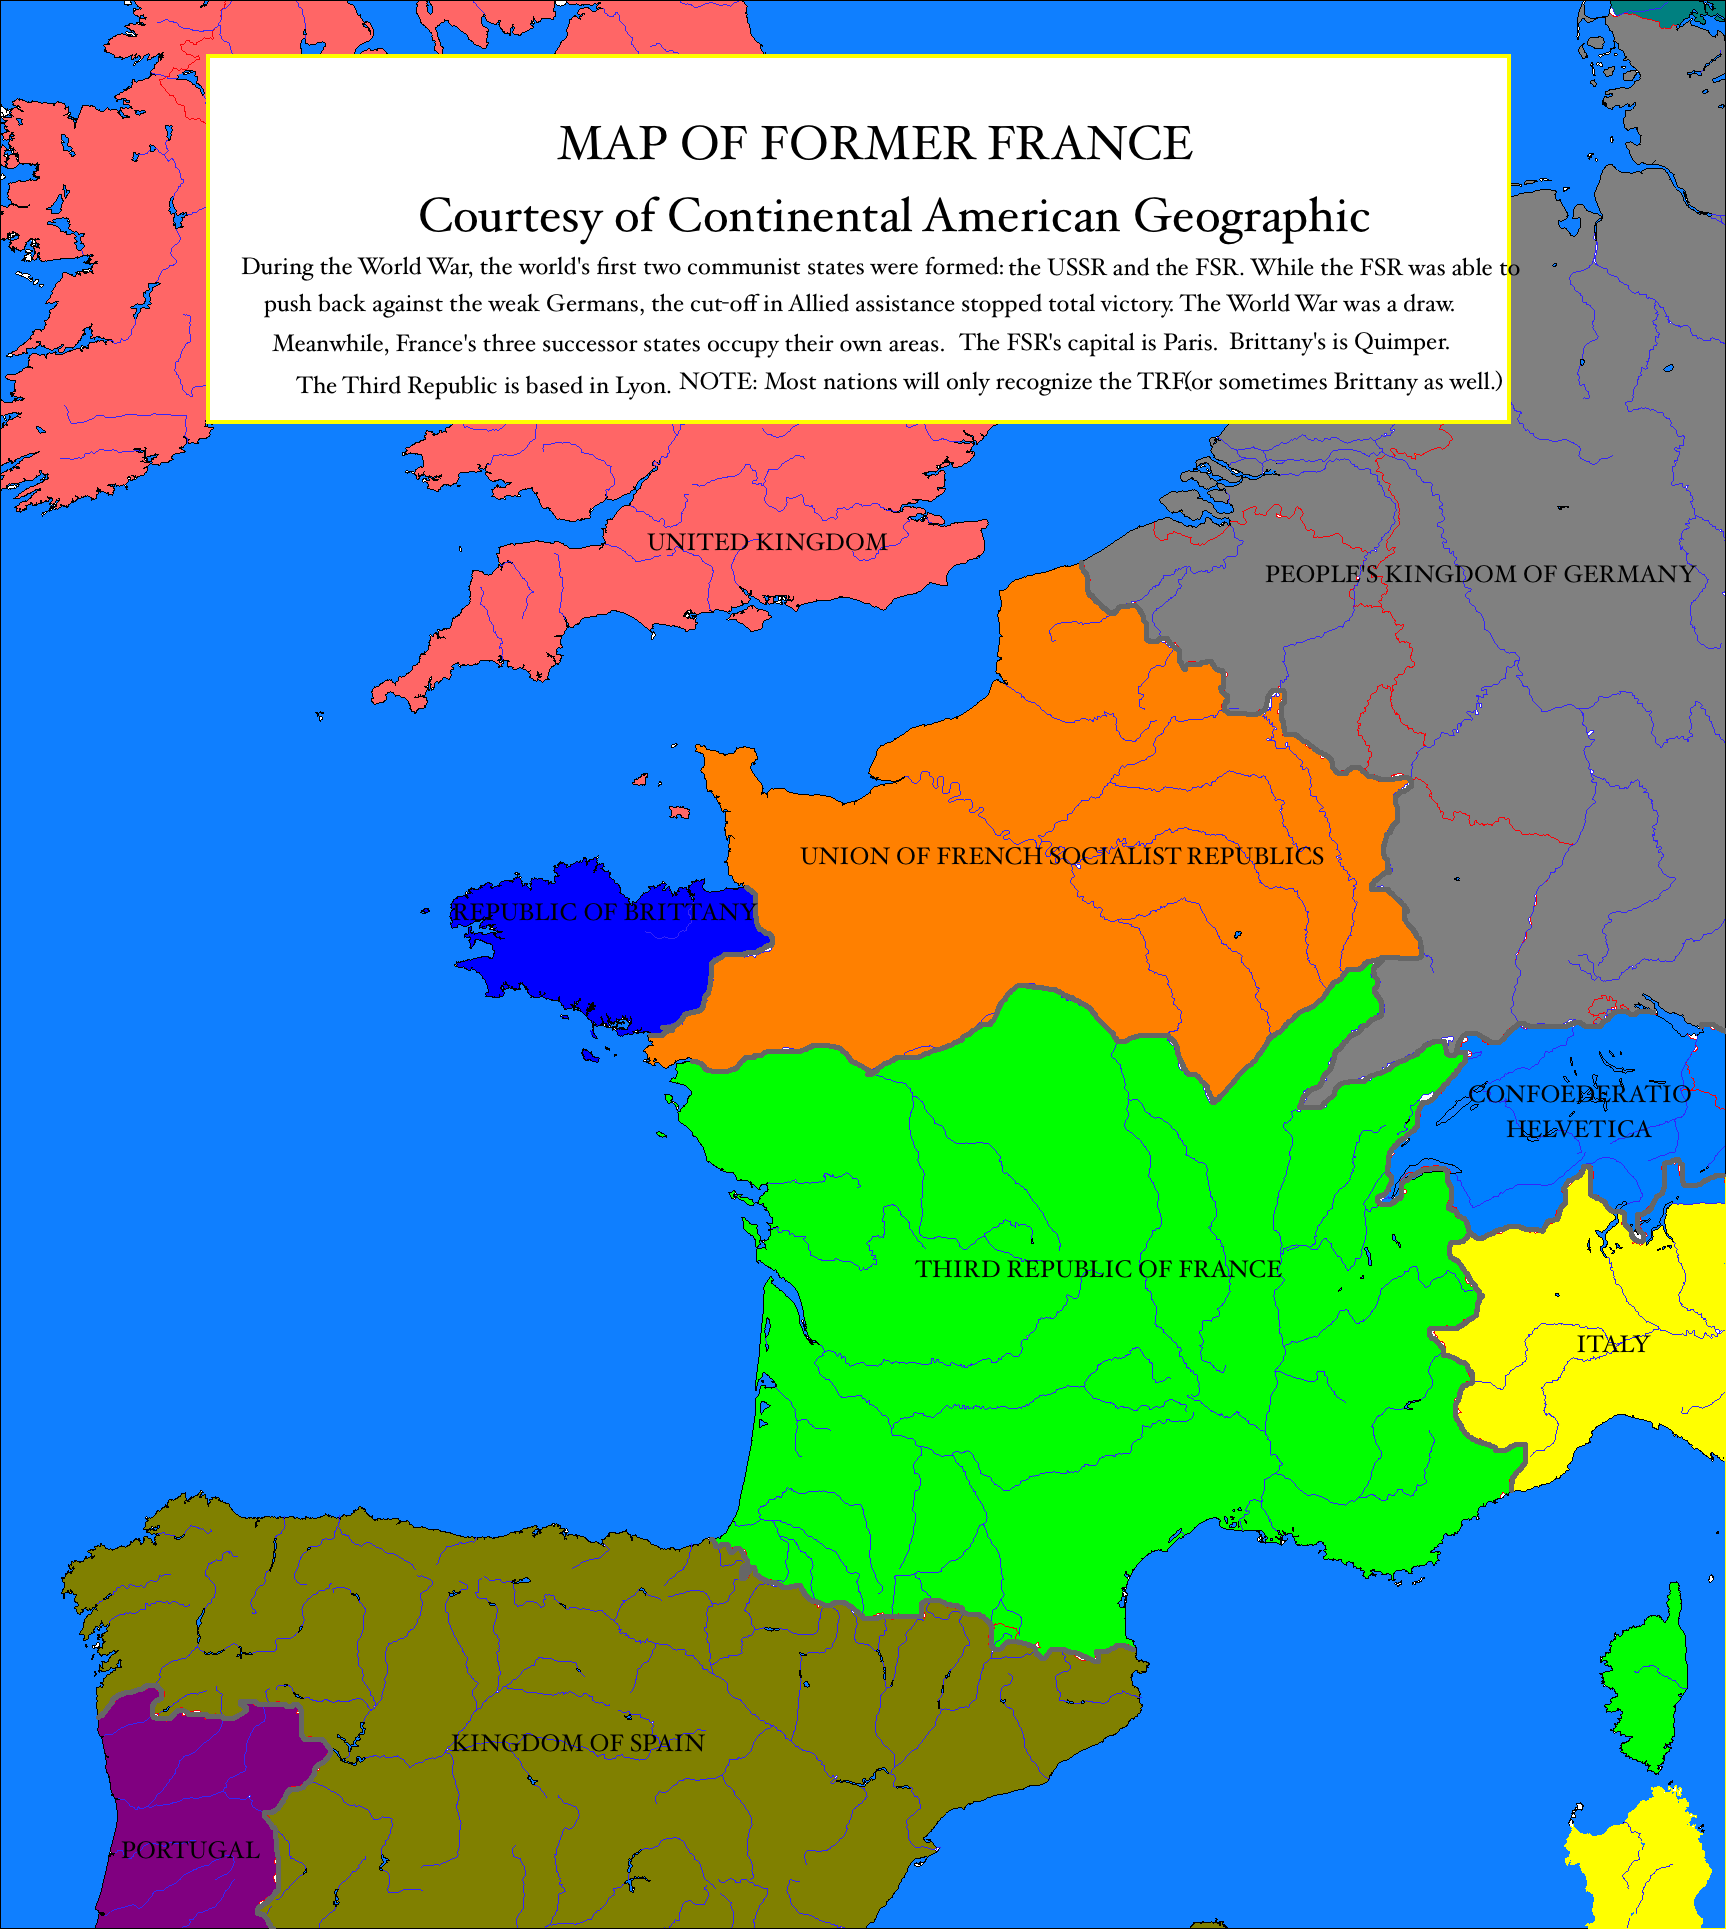 French_Socialist_Republic_%28Actual%29.png